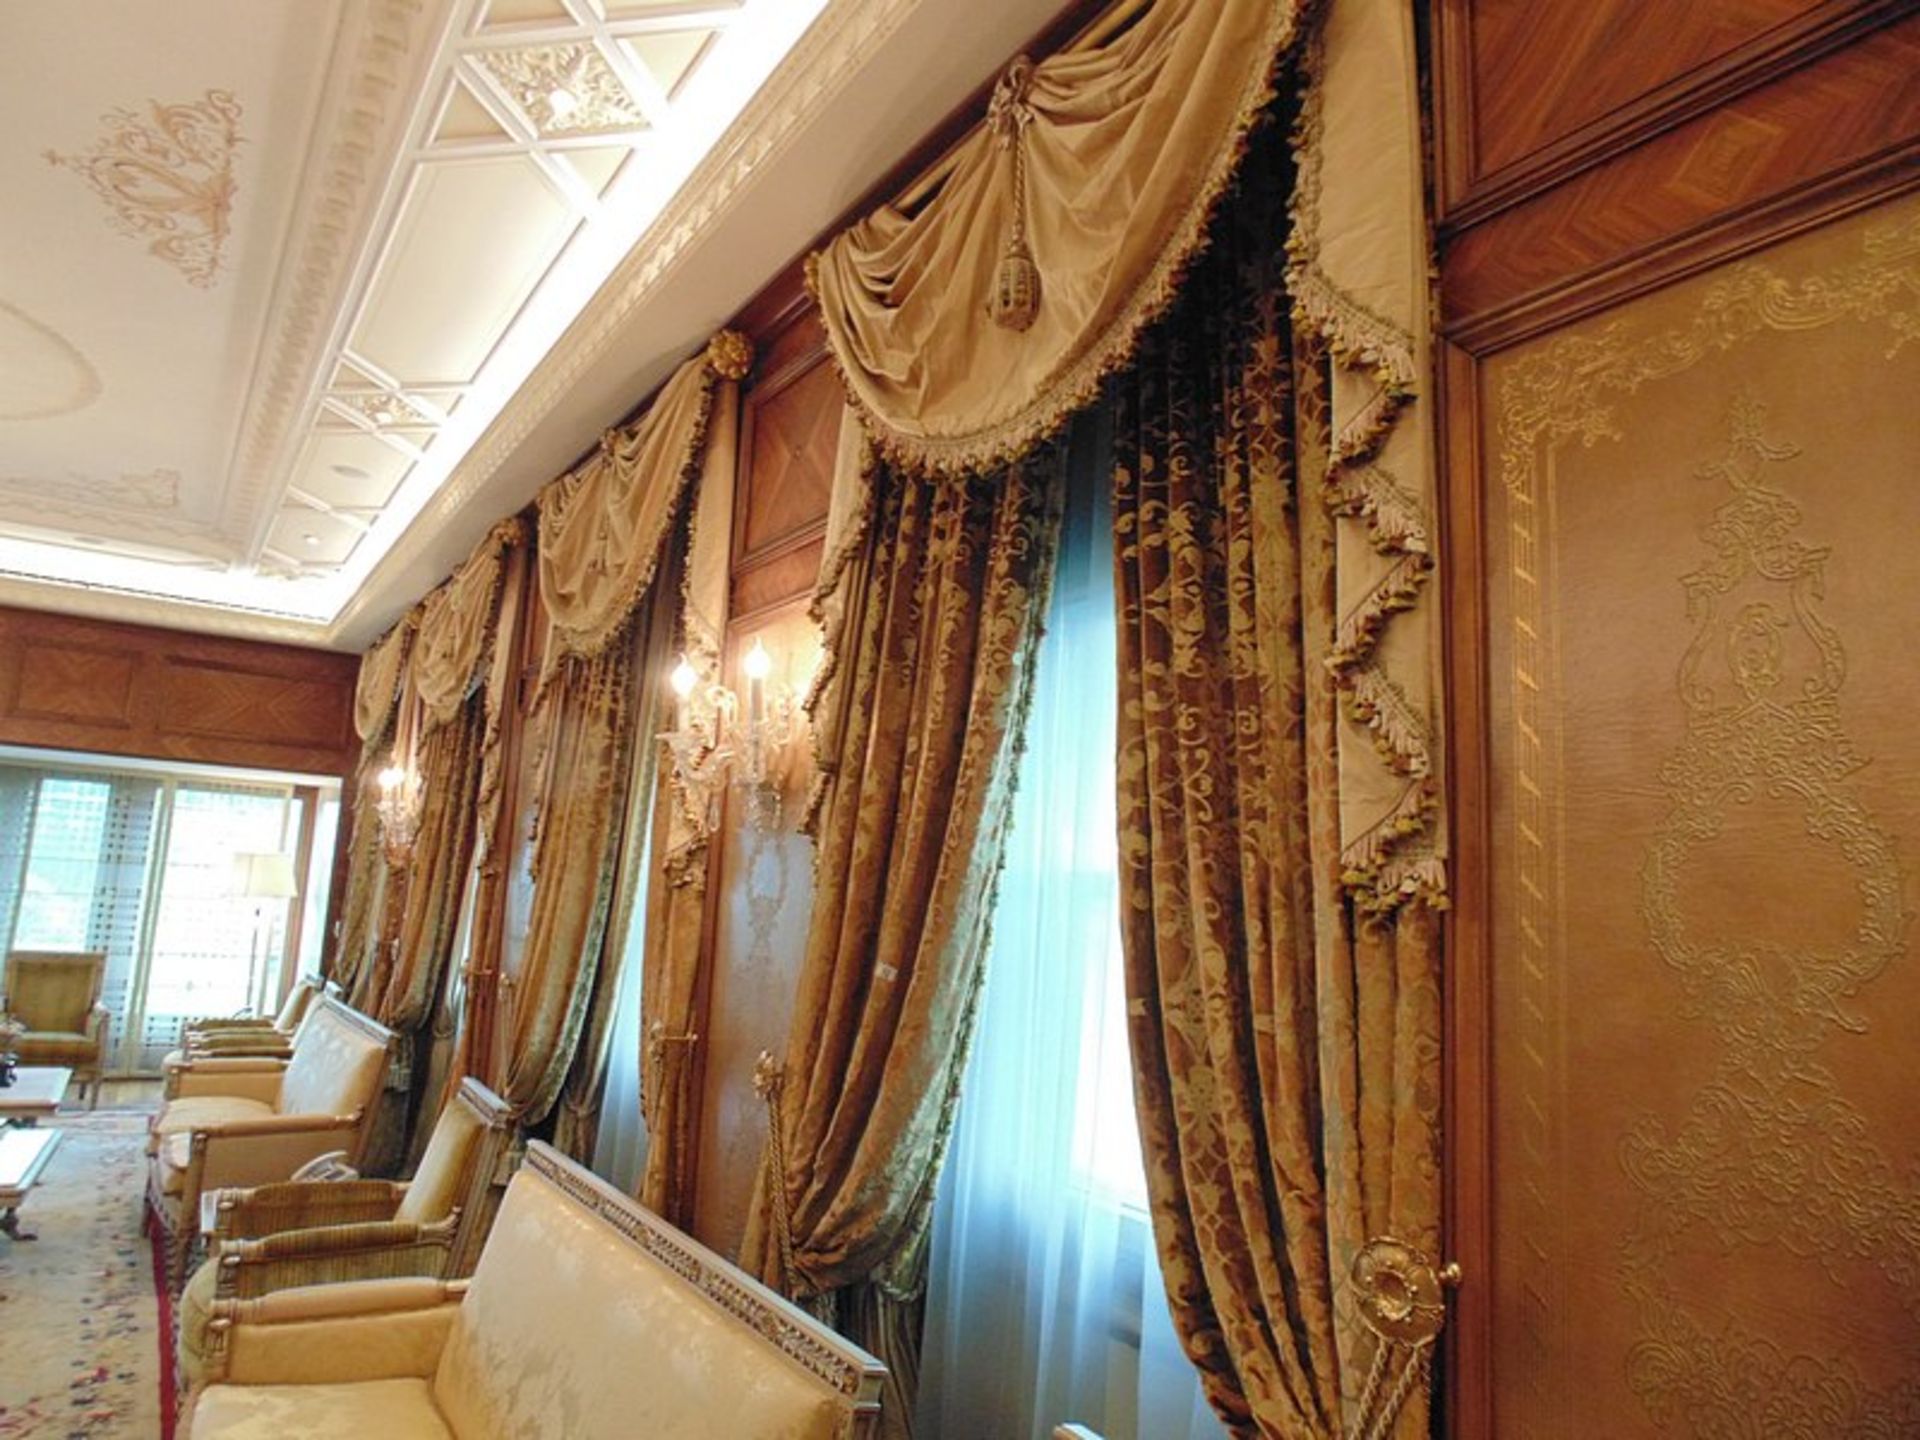 A pair of gold and burgundy curtains supplied by Jacquard from Rudolph Ackermann`s A series design